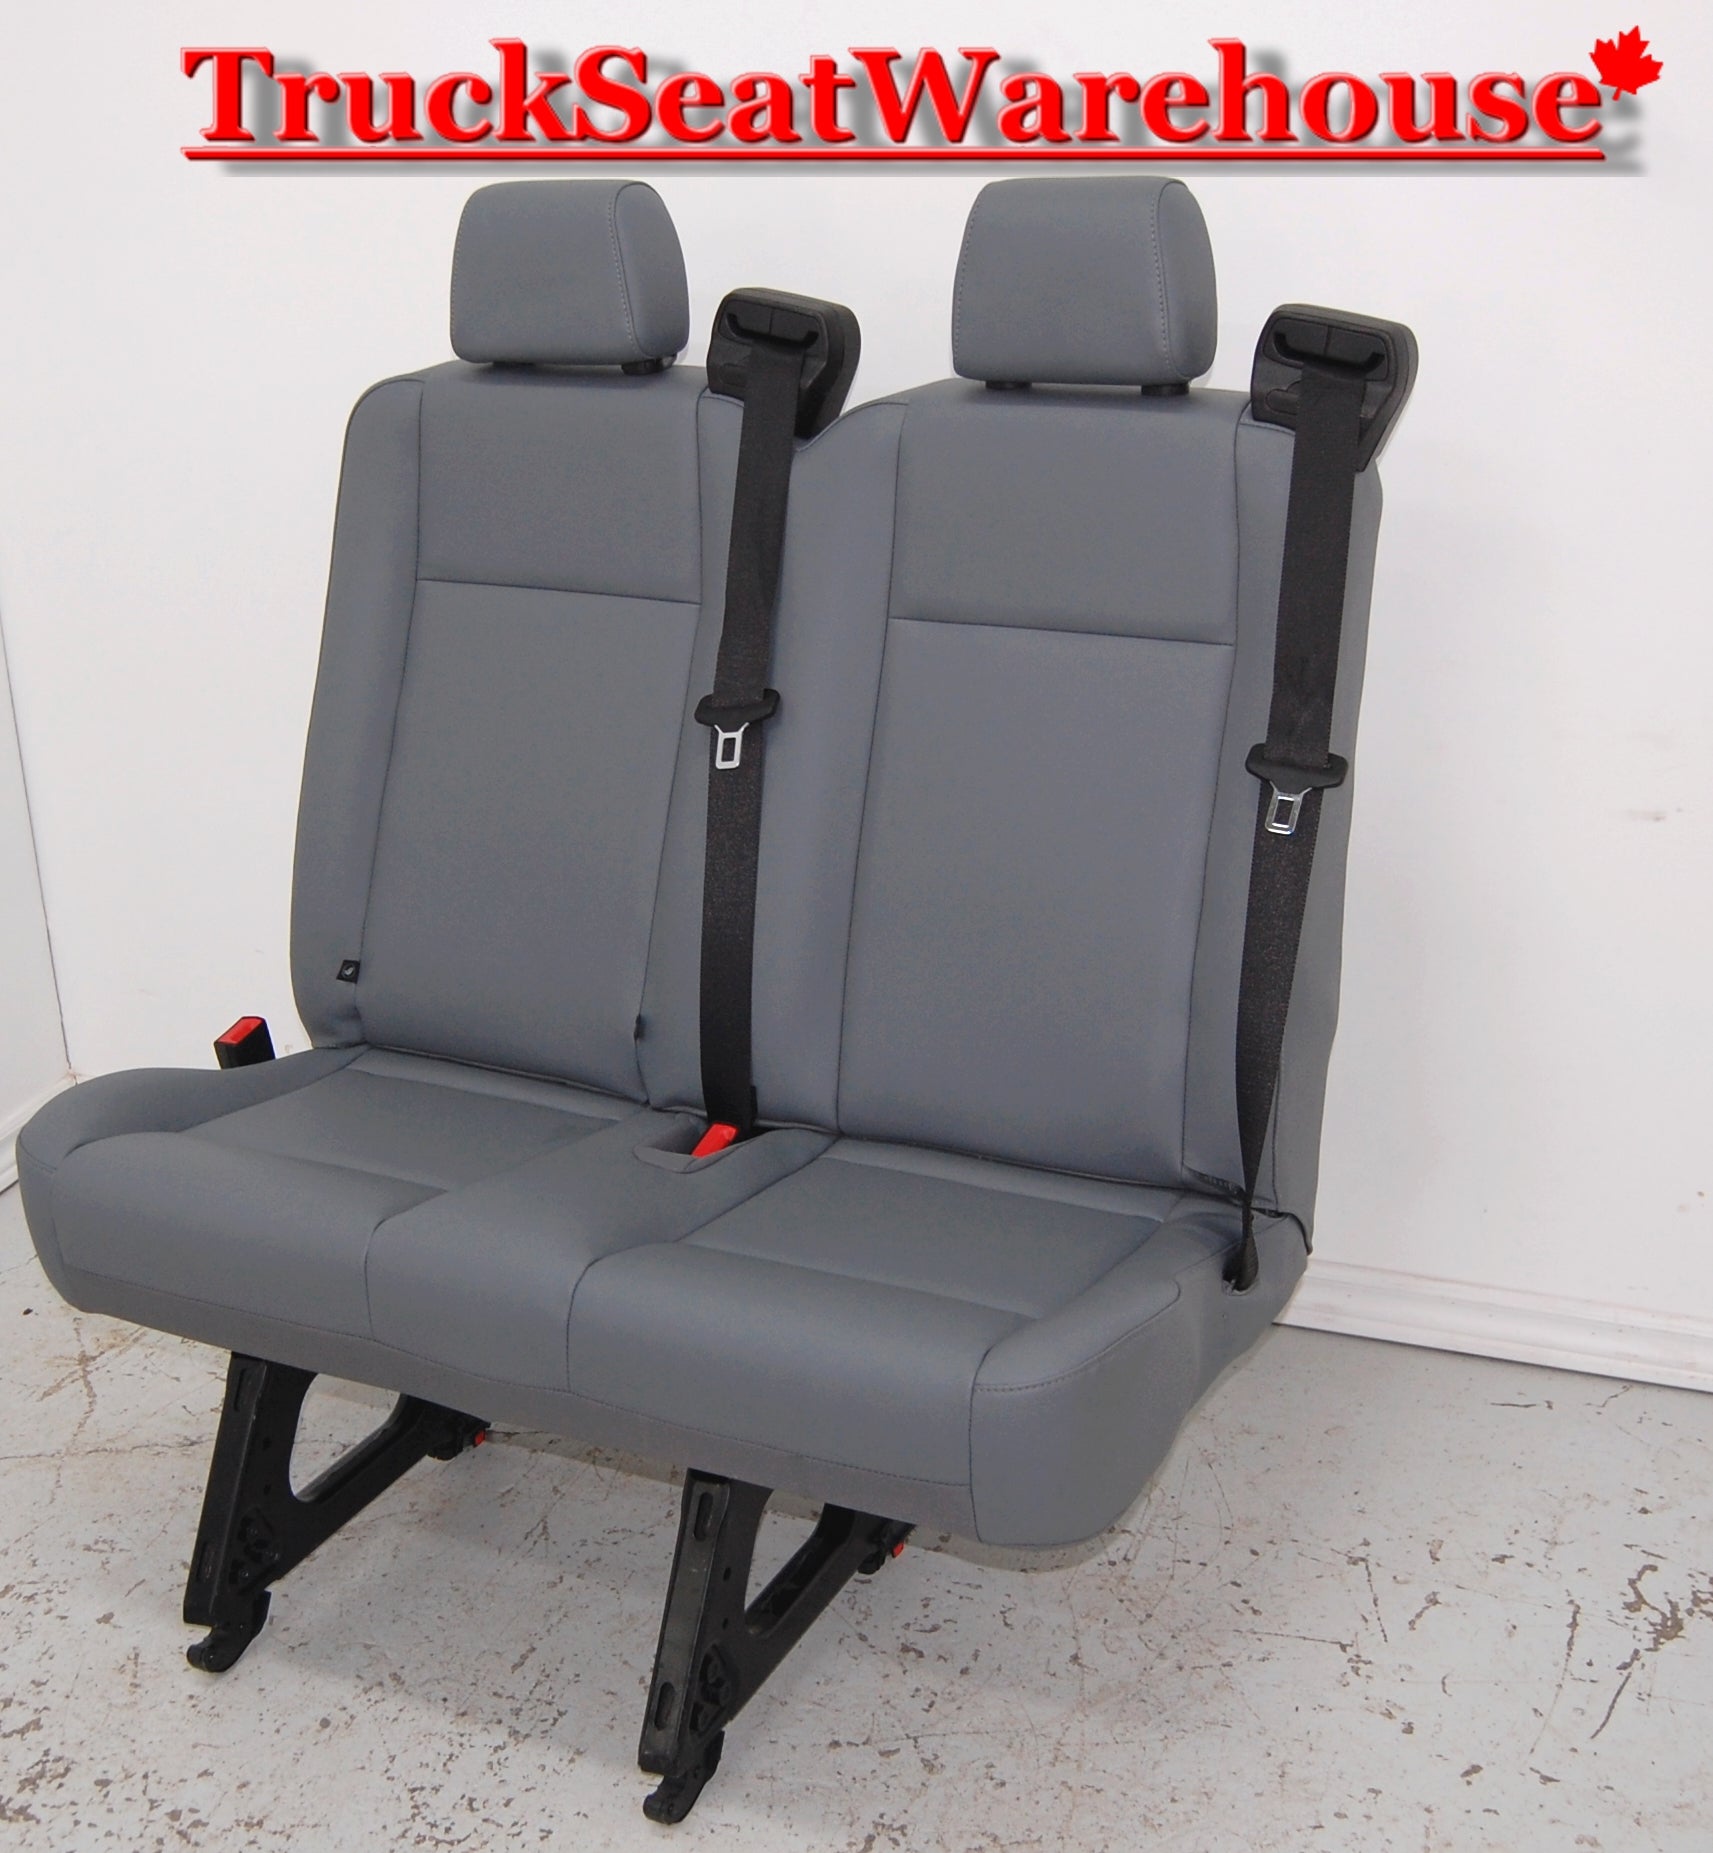 Ford Transit van 36 inch wide 2 position bench seat with mounts grey vinyl removable